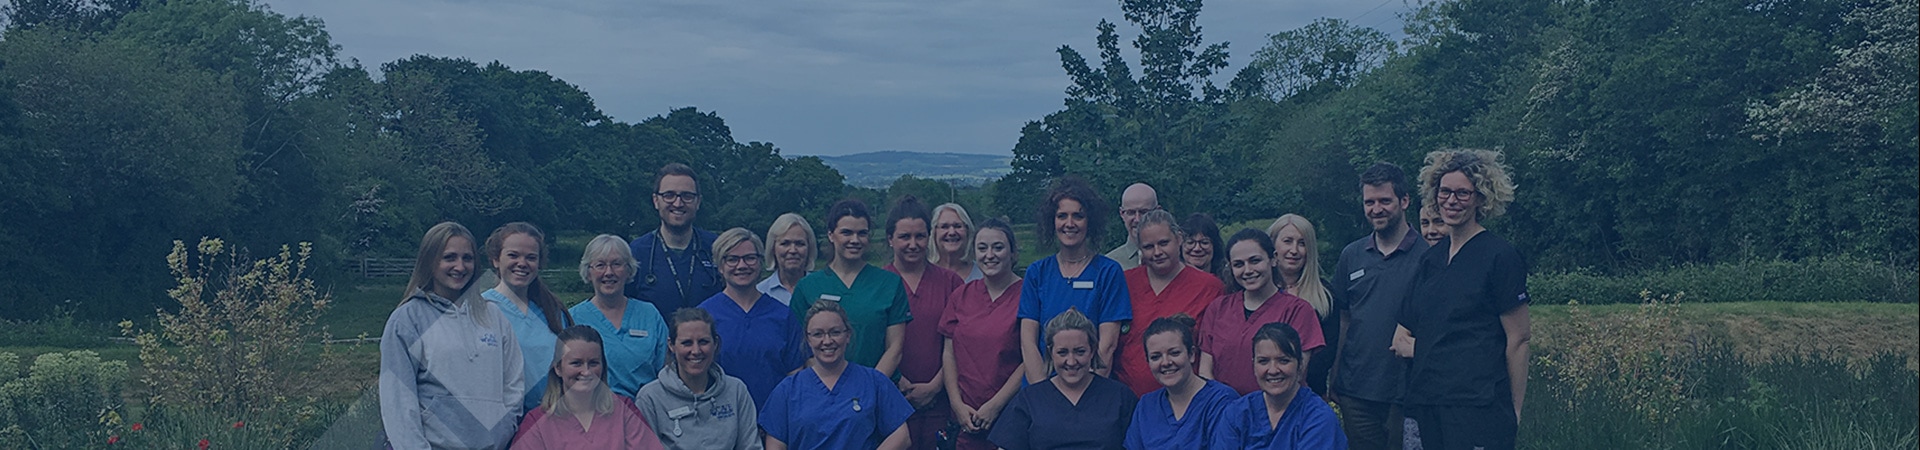 Orthopaedic Surgery Team | Cave Veterinary Specialists